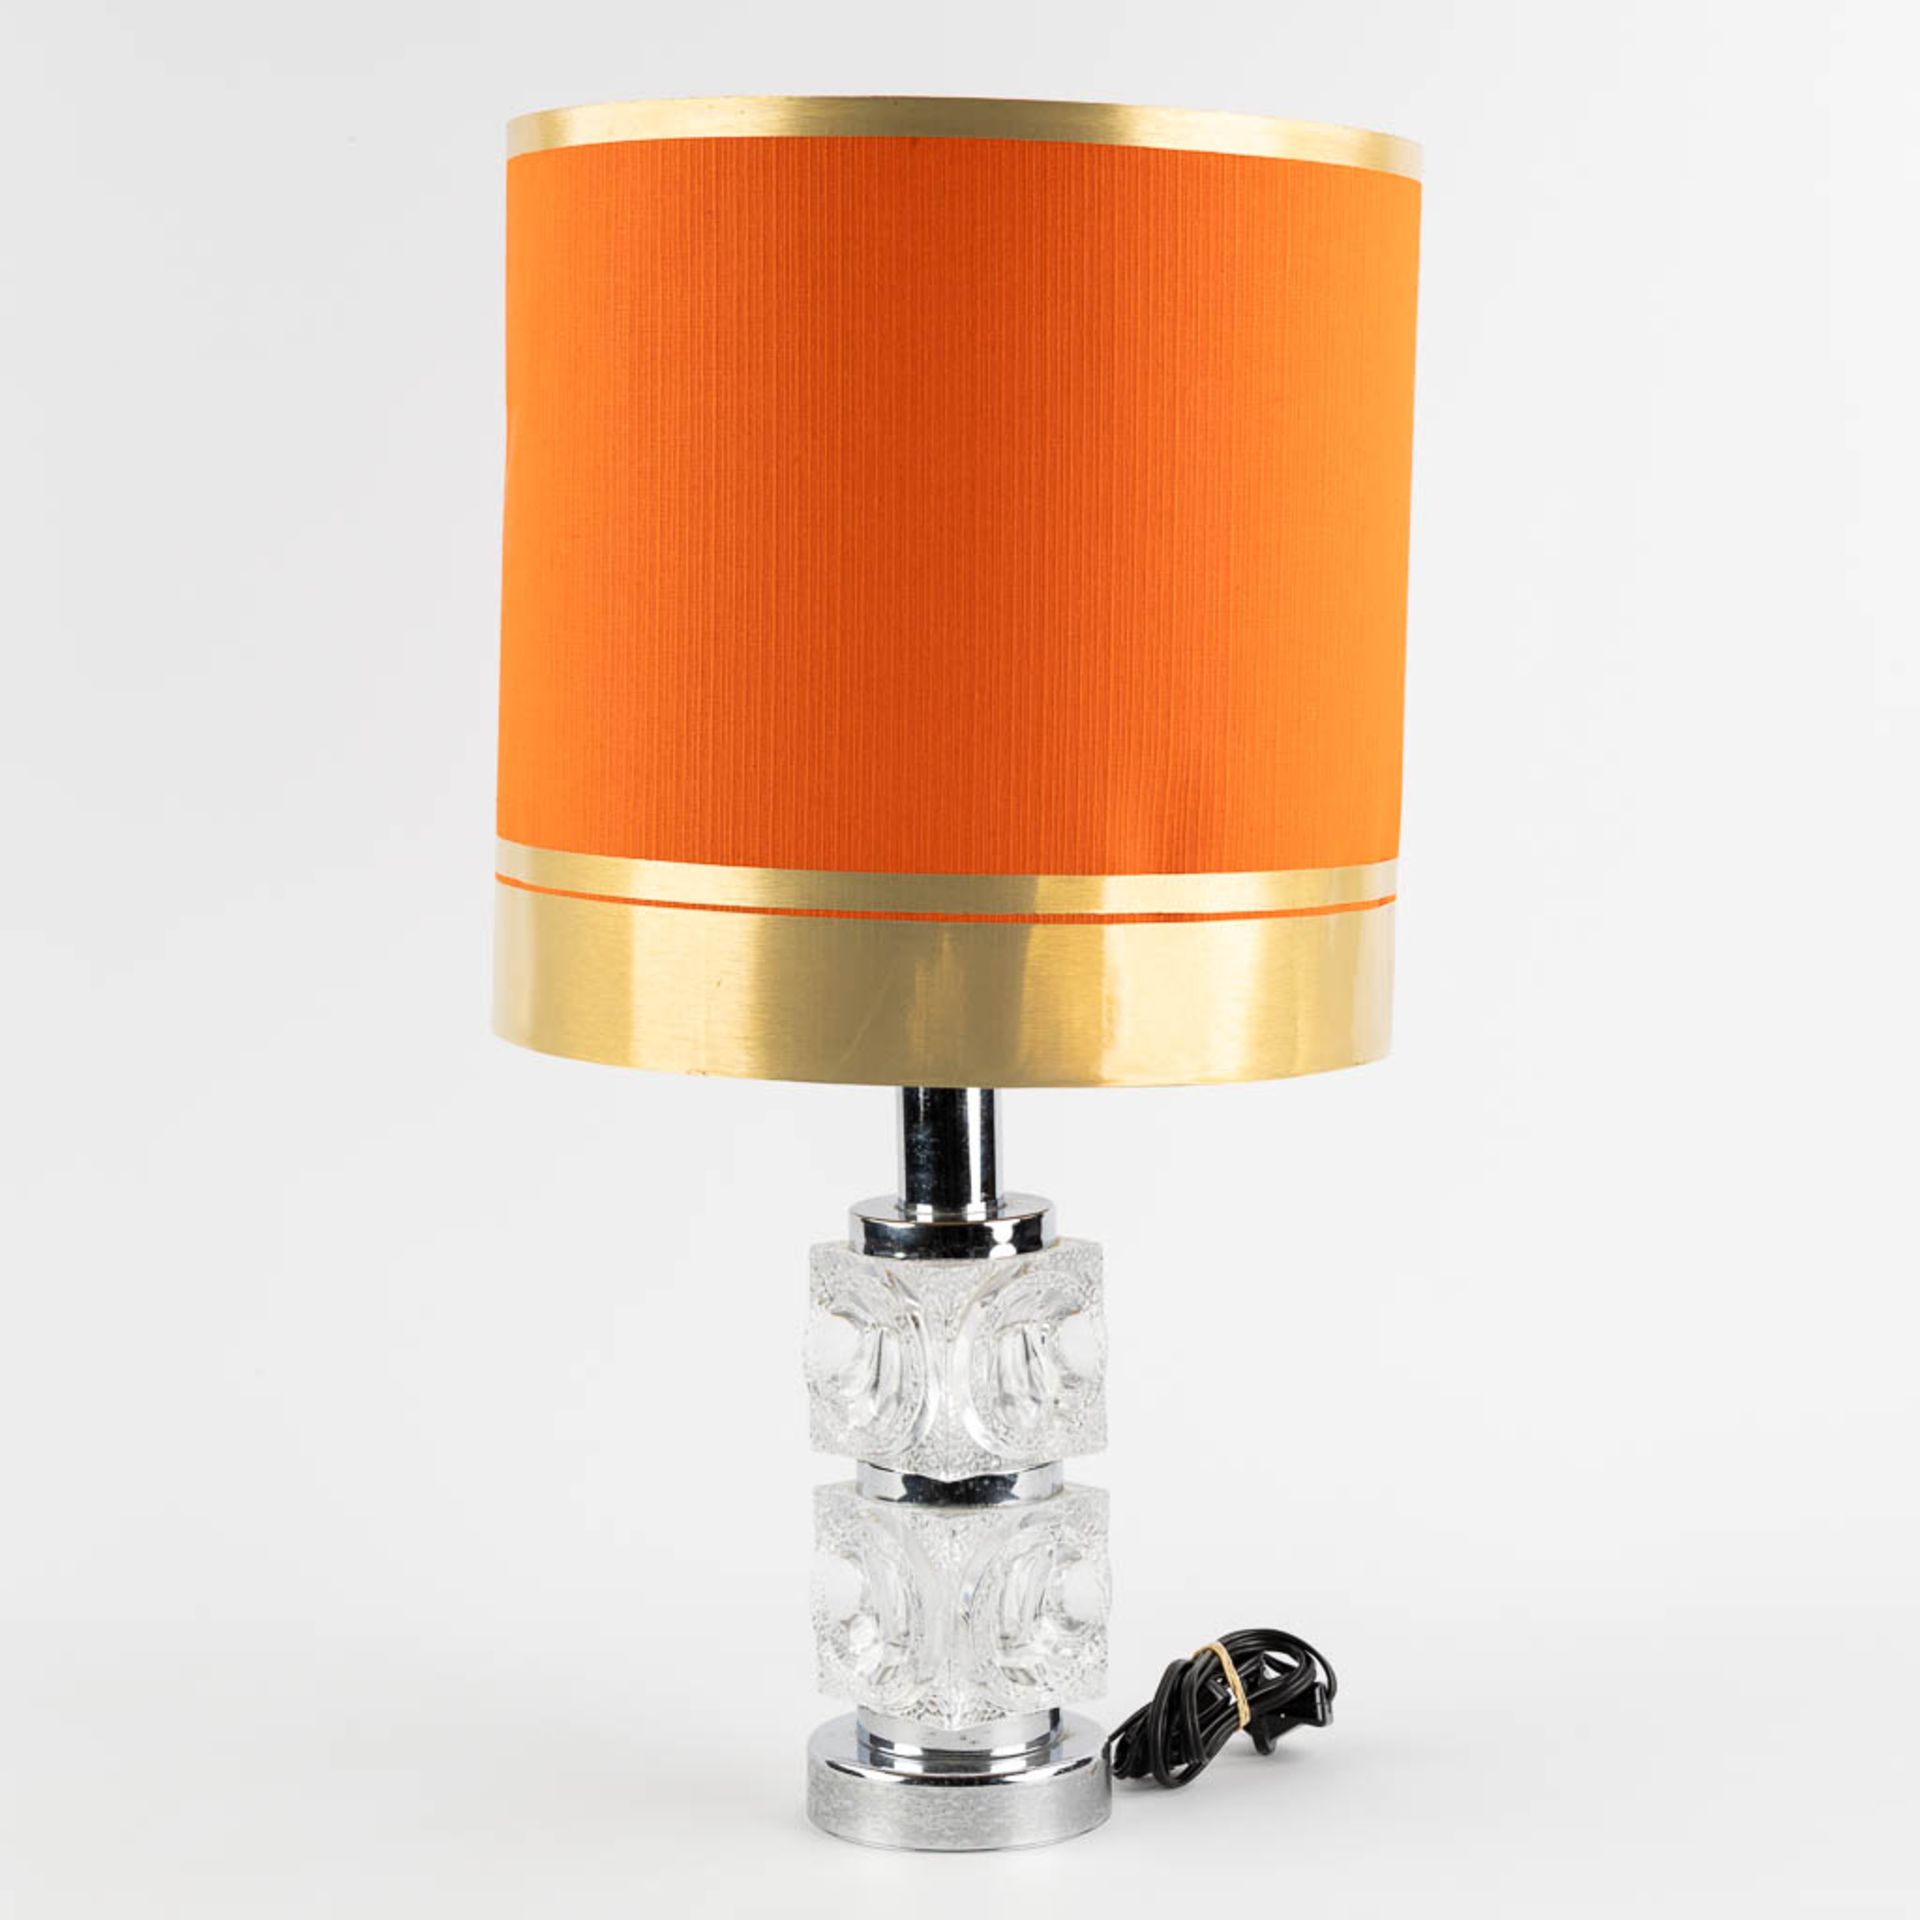 A mid-century table lamp, chromed metal and glass. Circa 1970. (H:37 x D:12,5 cm) - Image 3 of 9